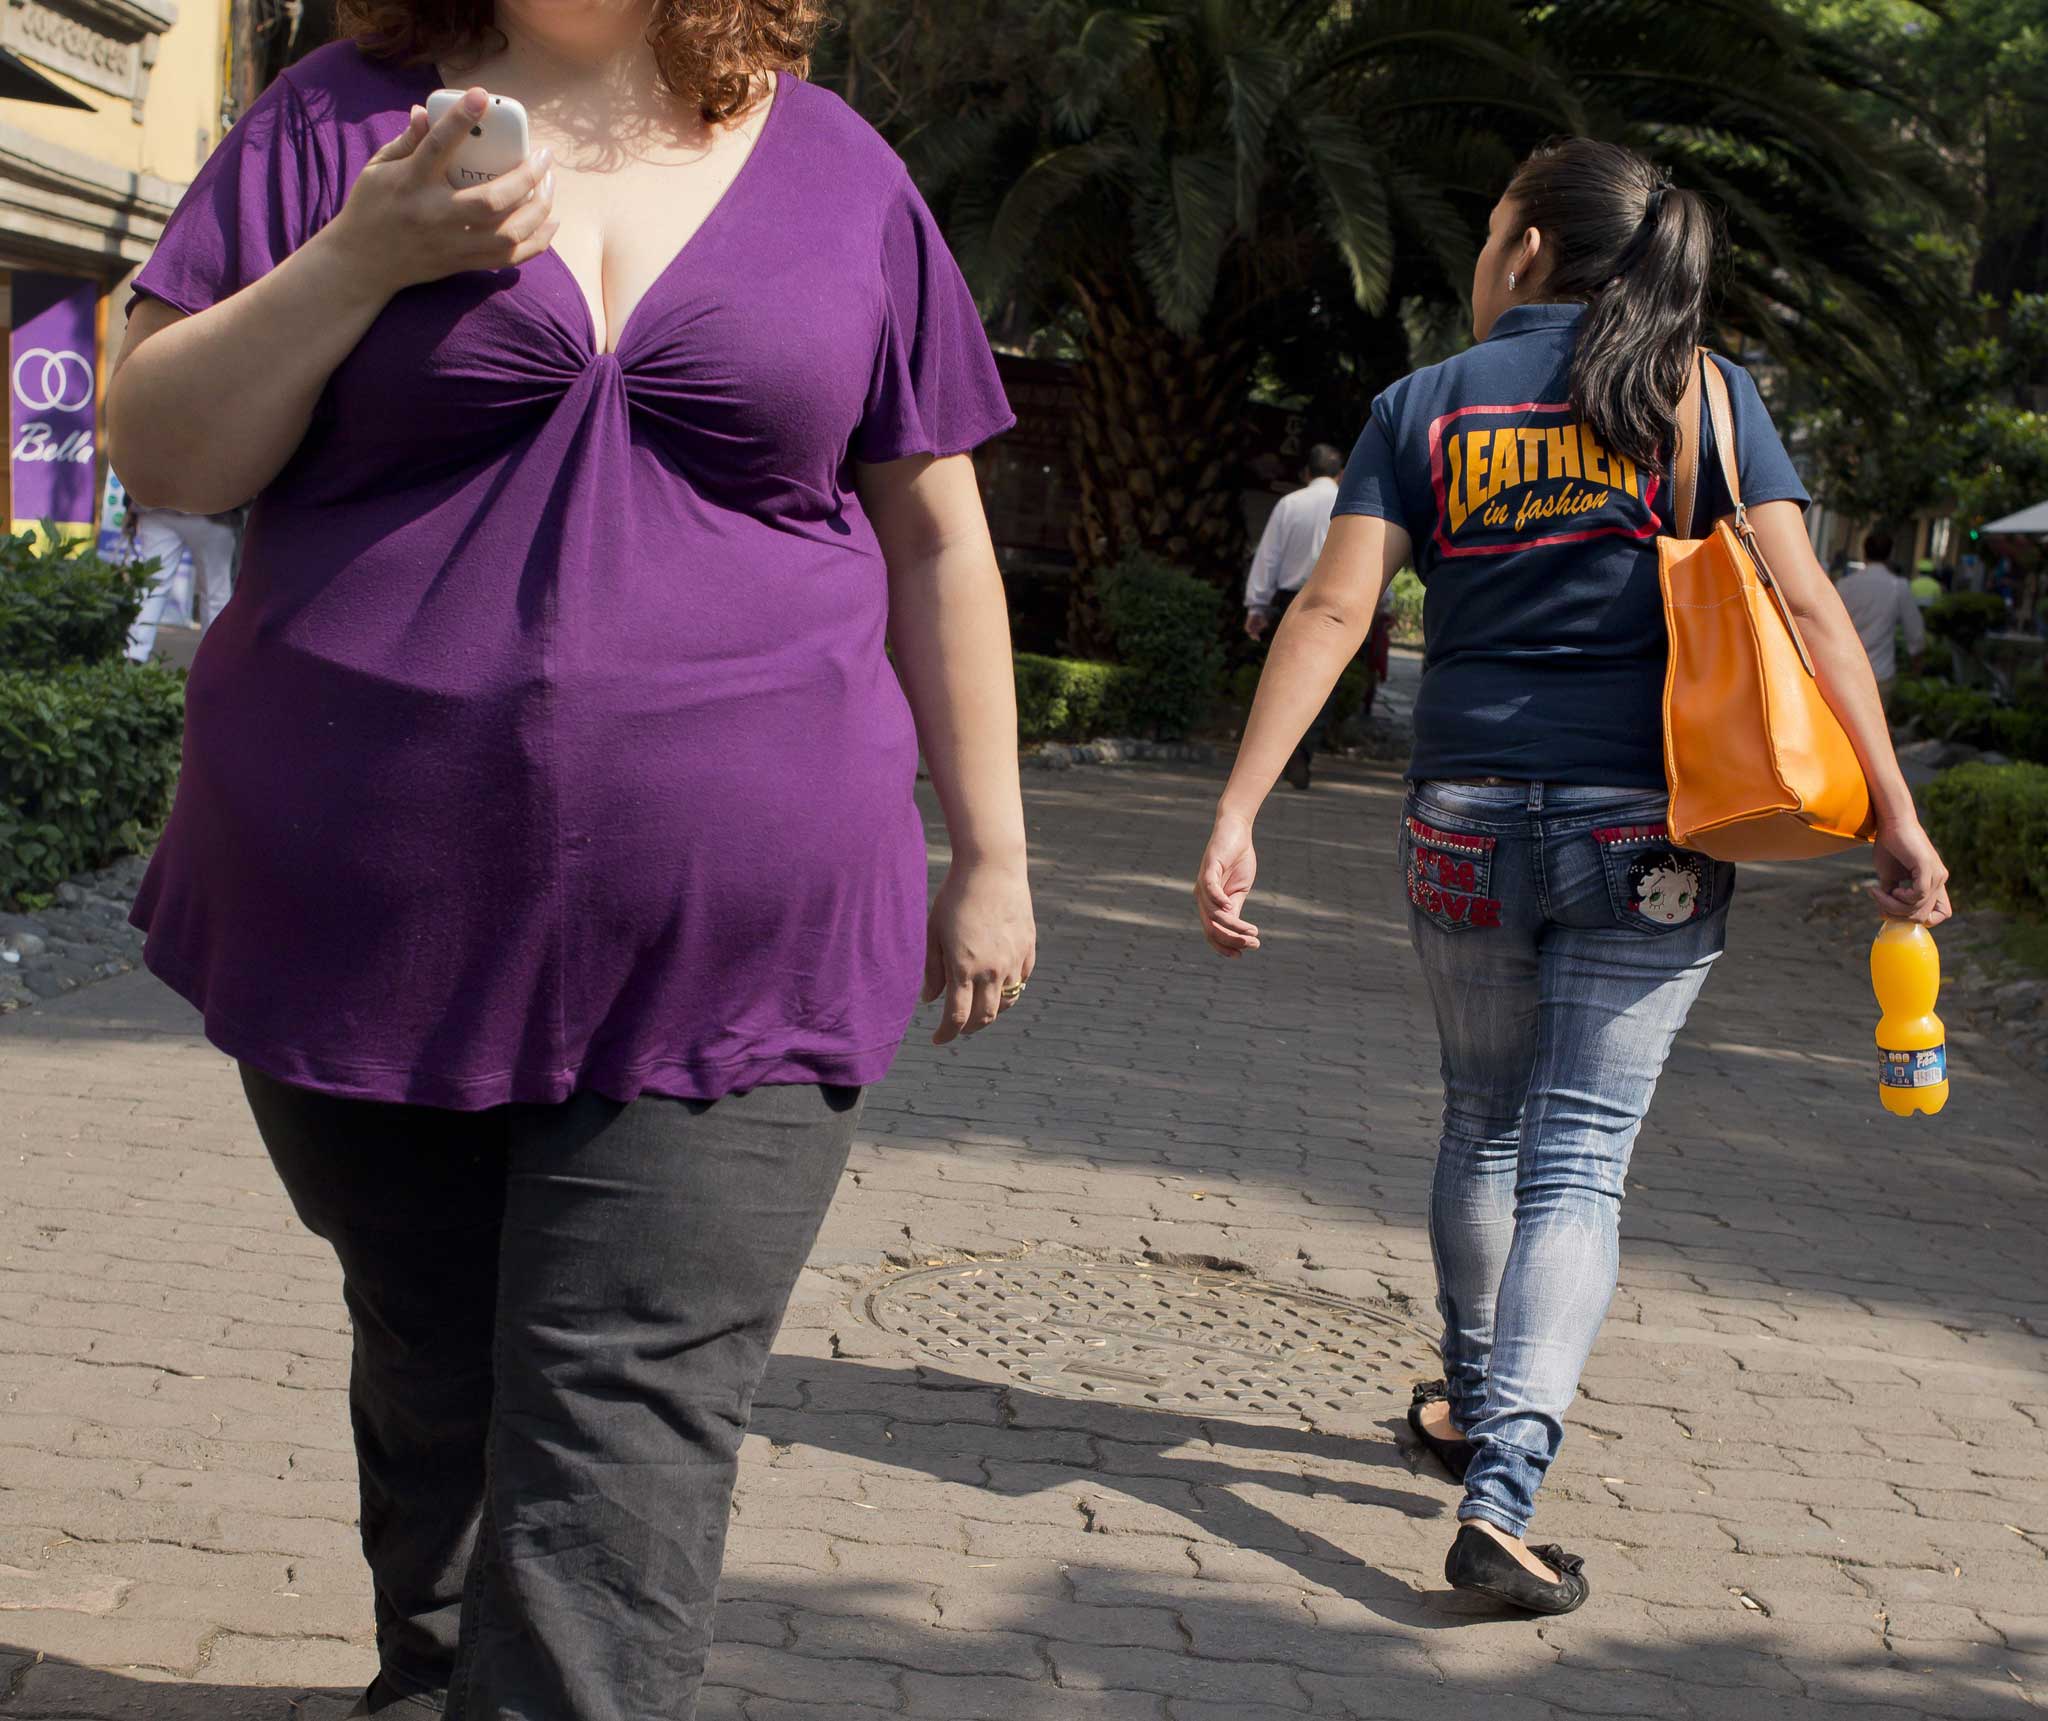 Weighty issue: Pictures of people from the neck down are often used for stories about obesity